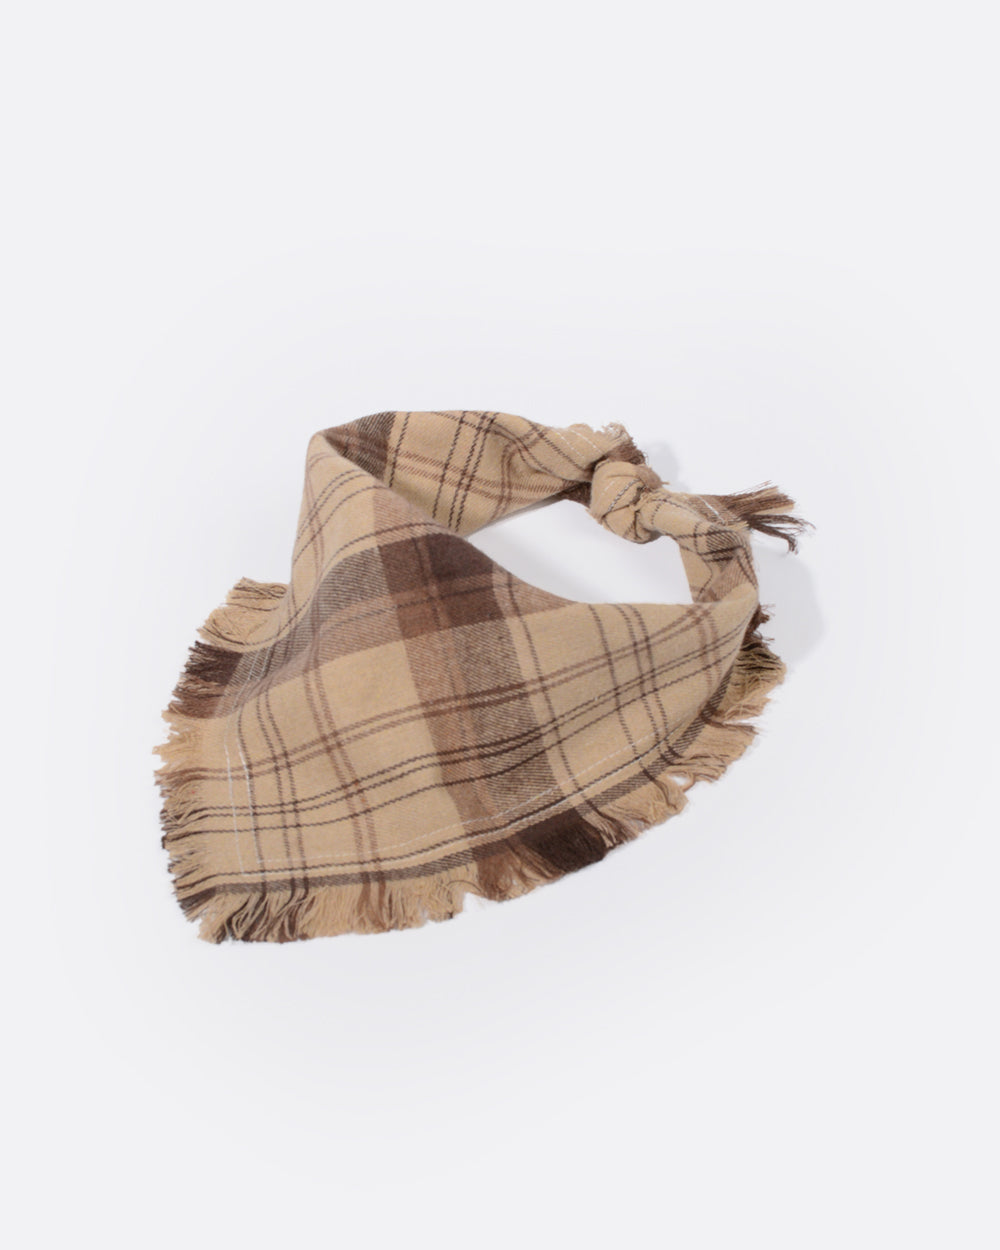 Bella & Pal Christmas flannel triangle bib is good to be used to dress up your pup in autumn or winter. This tartan plaid features brown, khaki, which brings a tinge of autumn. With a classic tassel design, make your pup looks fashionable and radiant this Christmas season.